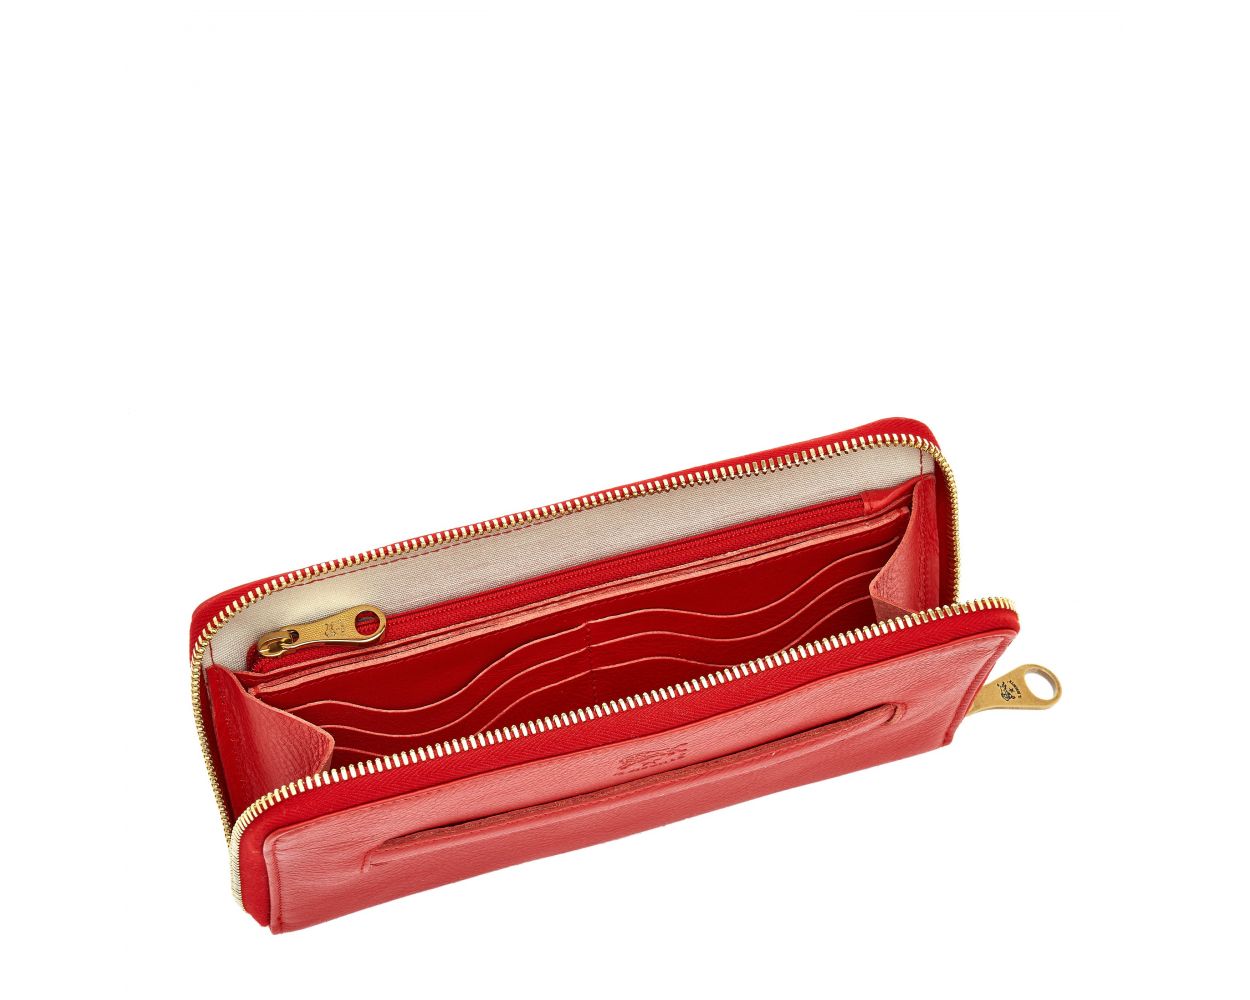 Women's Zip Around Wallet in Soft Vegetable-Tanned Cowhide Leather color - Salina line SZW045 - Bright Red